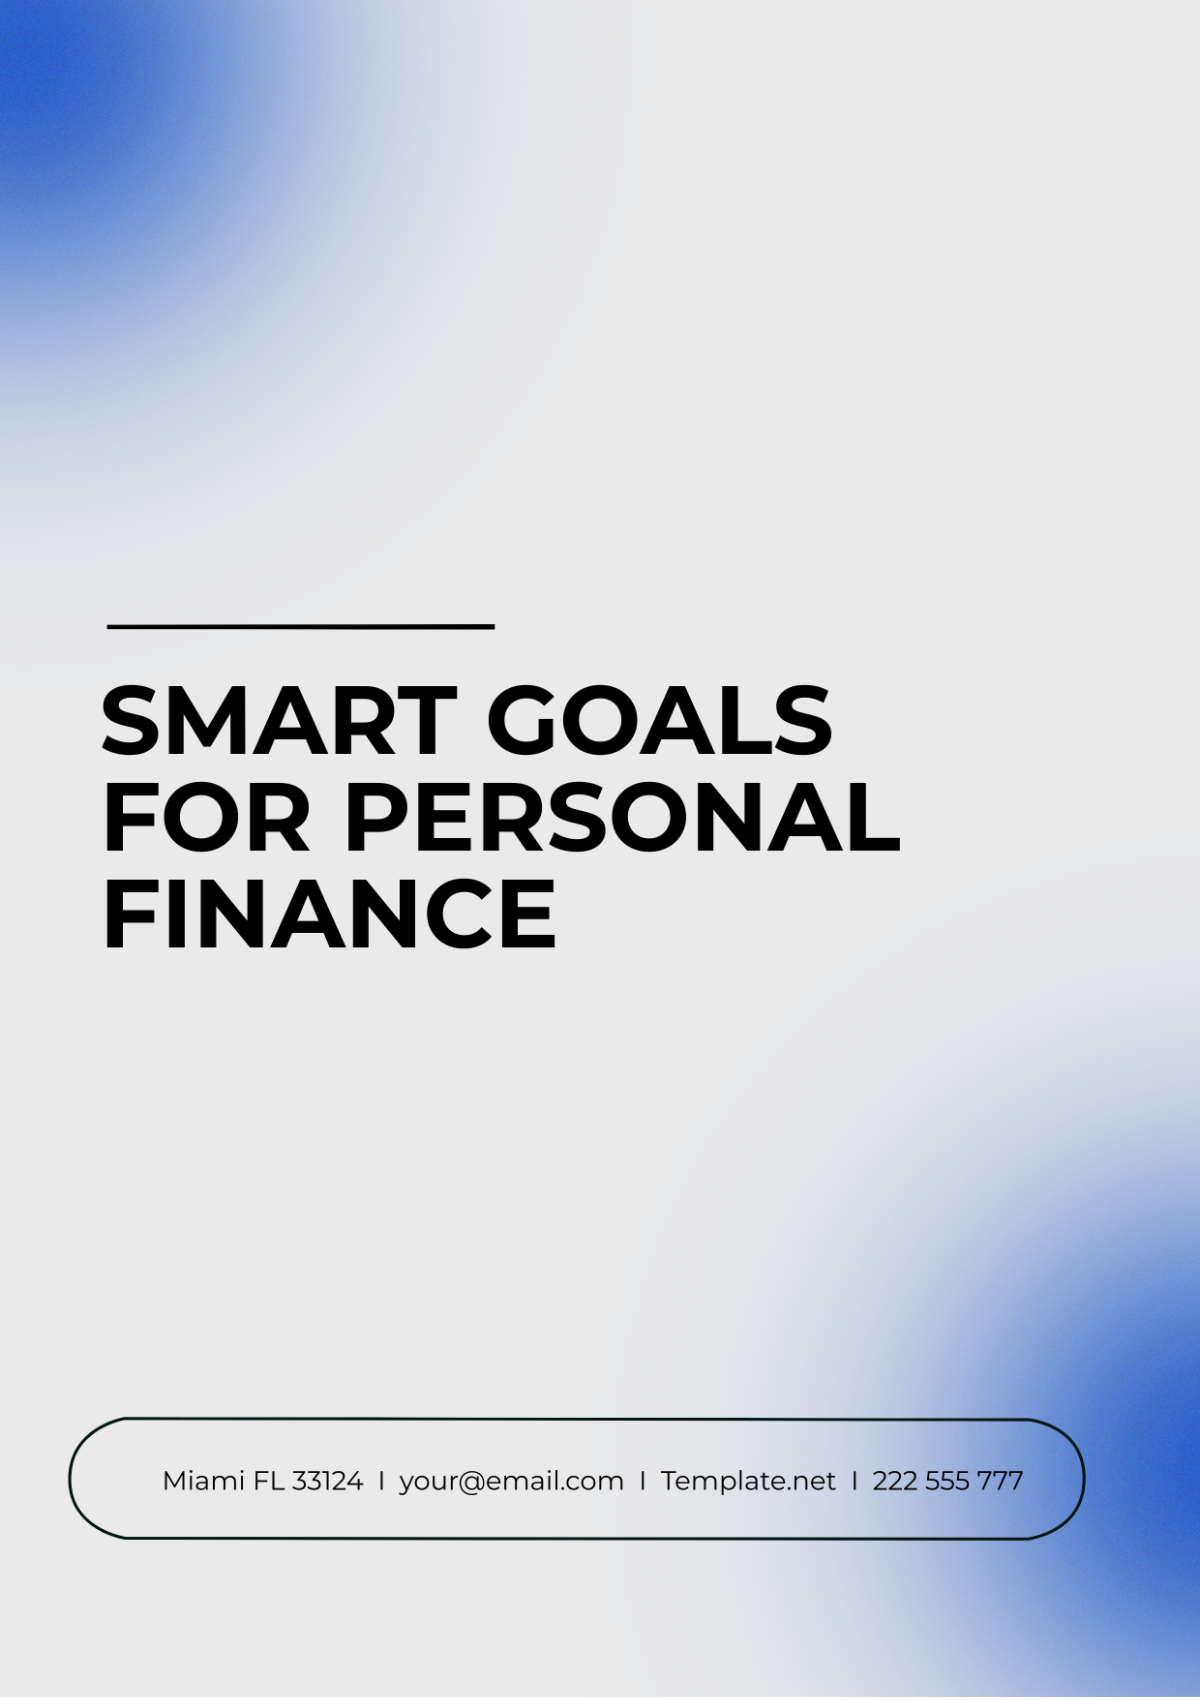 SMART Goals Template for Personal Finance